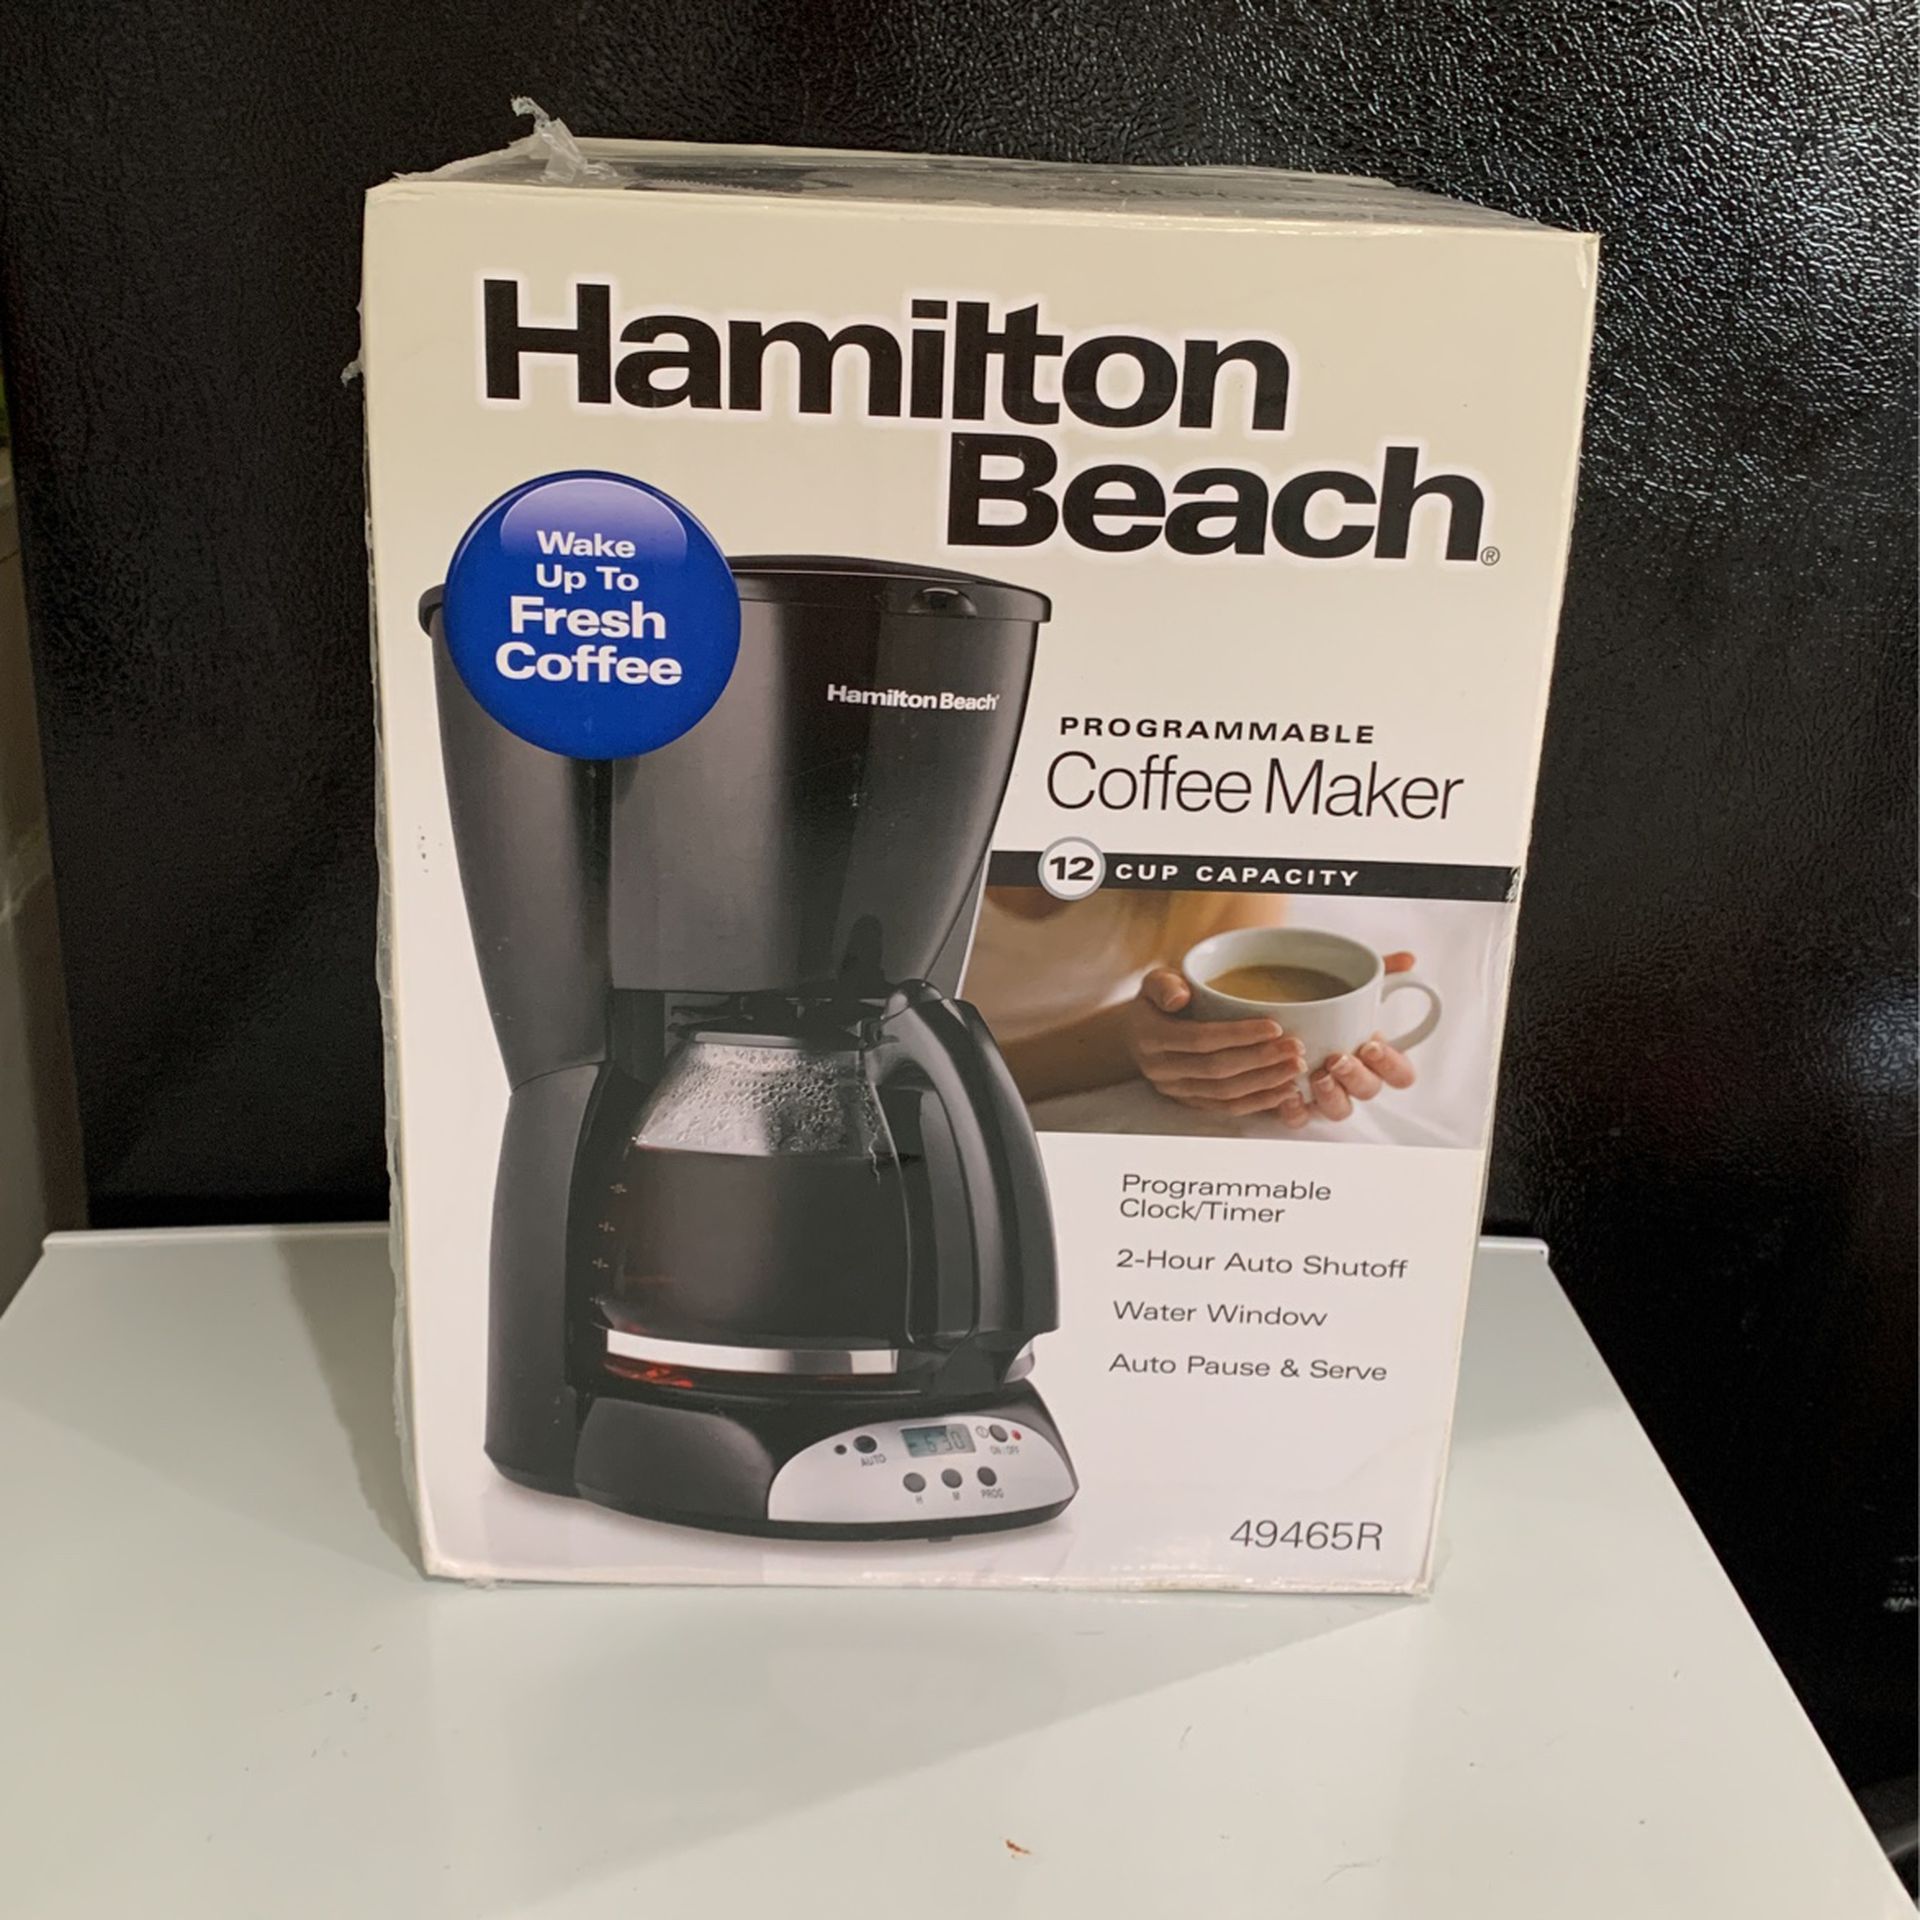 Hamilton Beach Coffee Maker for Sale in Queens, NY - OfferUp